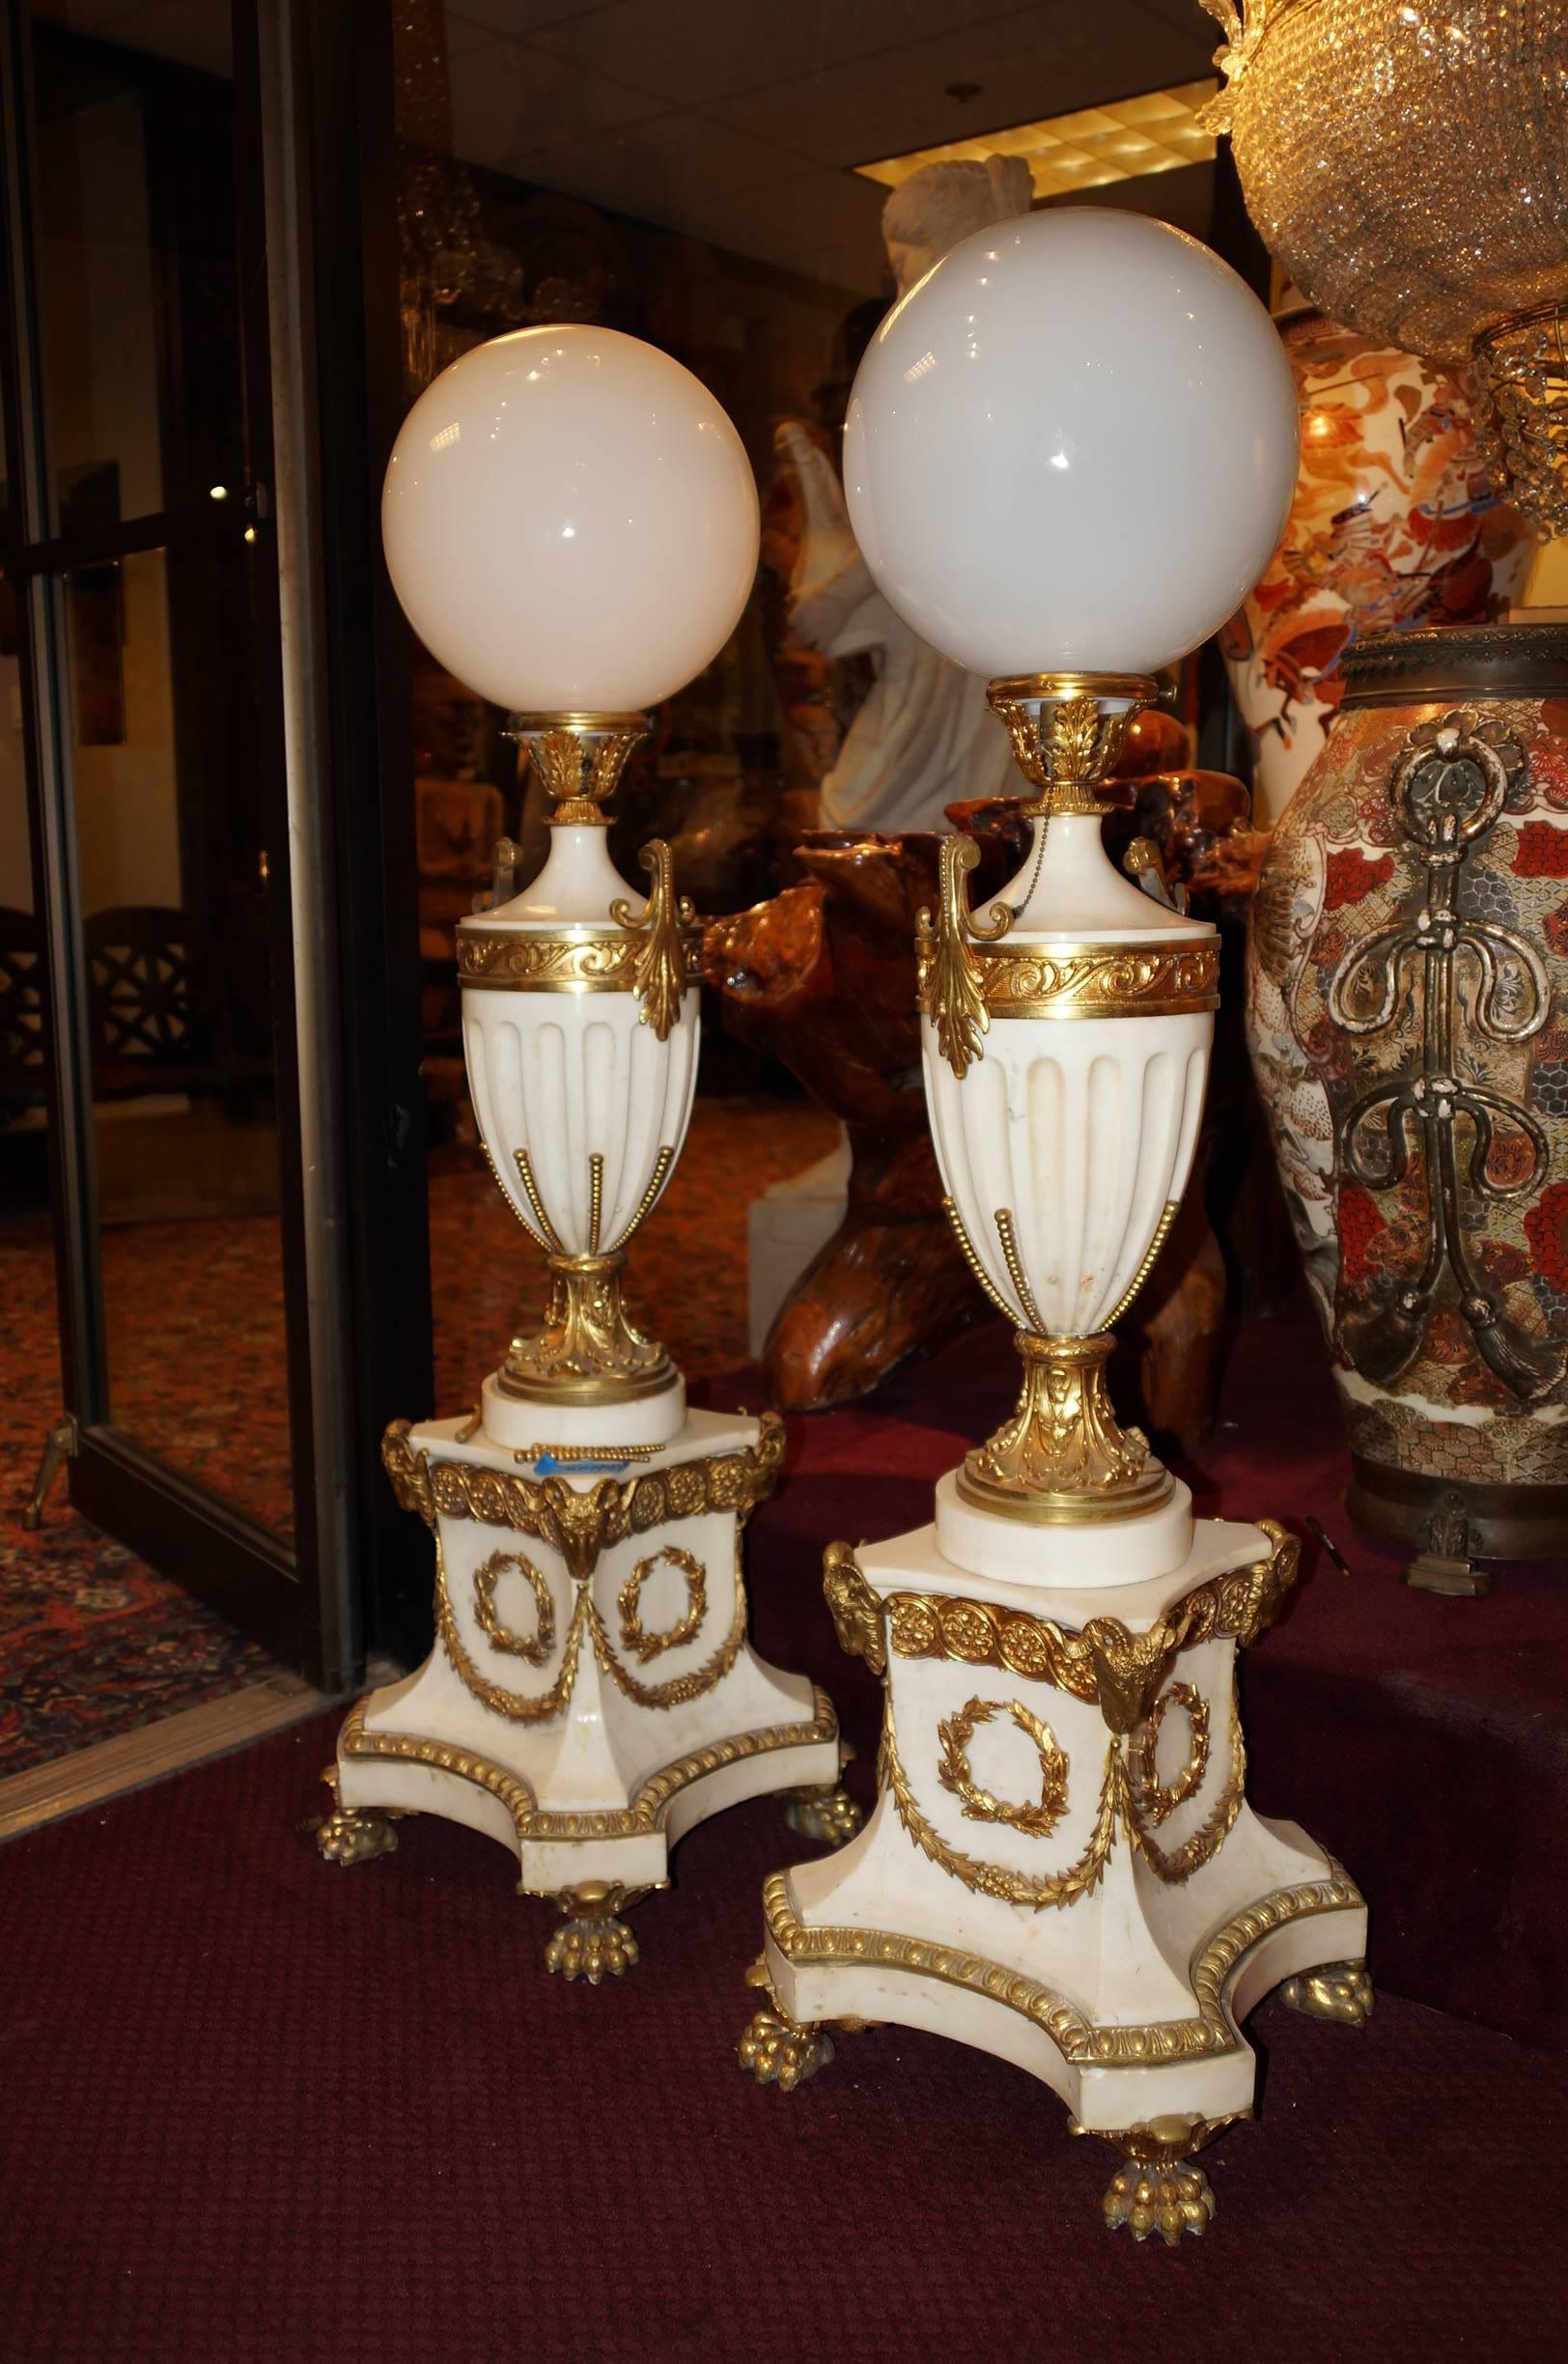 Pair of French Louis XVI style white marble and bronze floor lamp torchieres with rams head and paw feet.
Stock Number: LL38